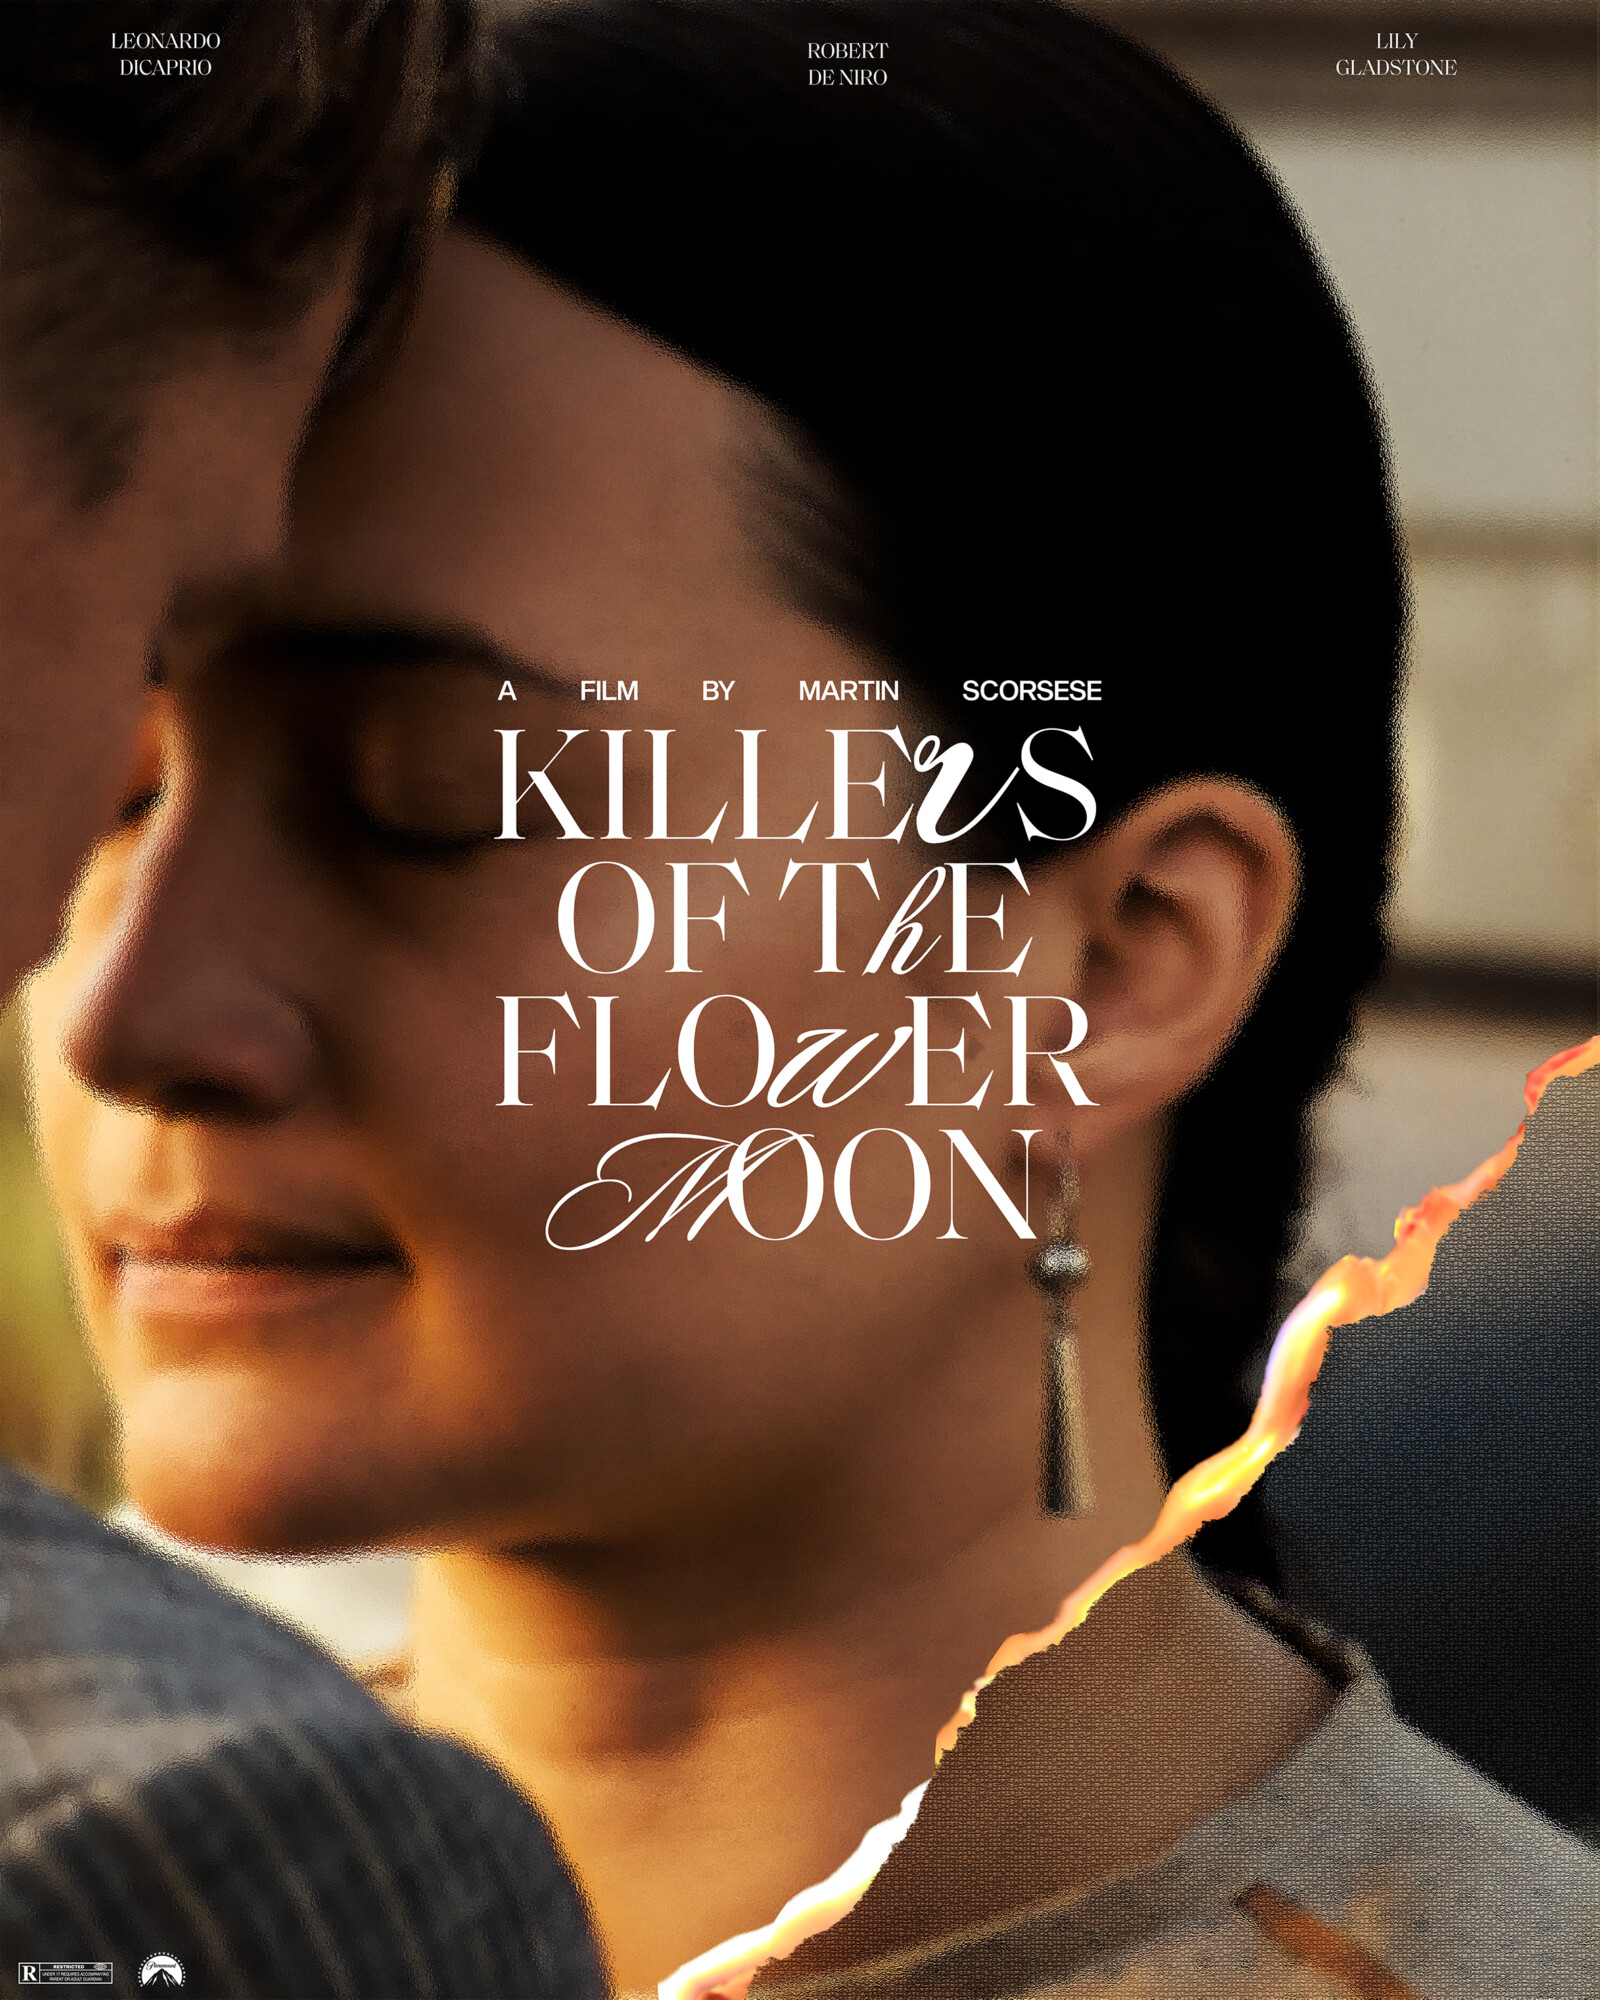 Killers of the Flower Moon, A film By Martin Scorsese